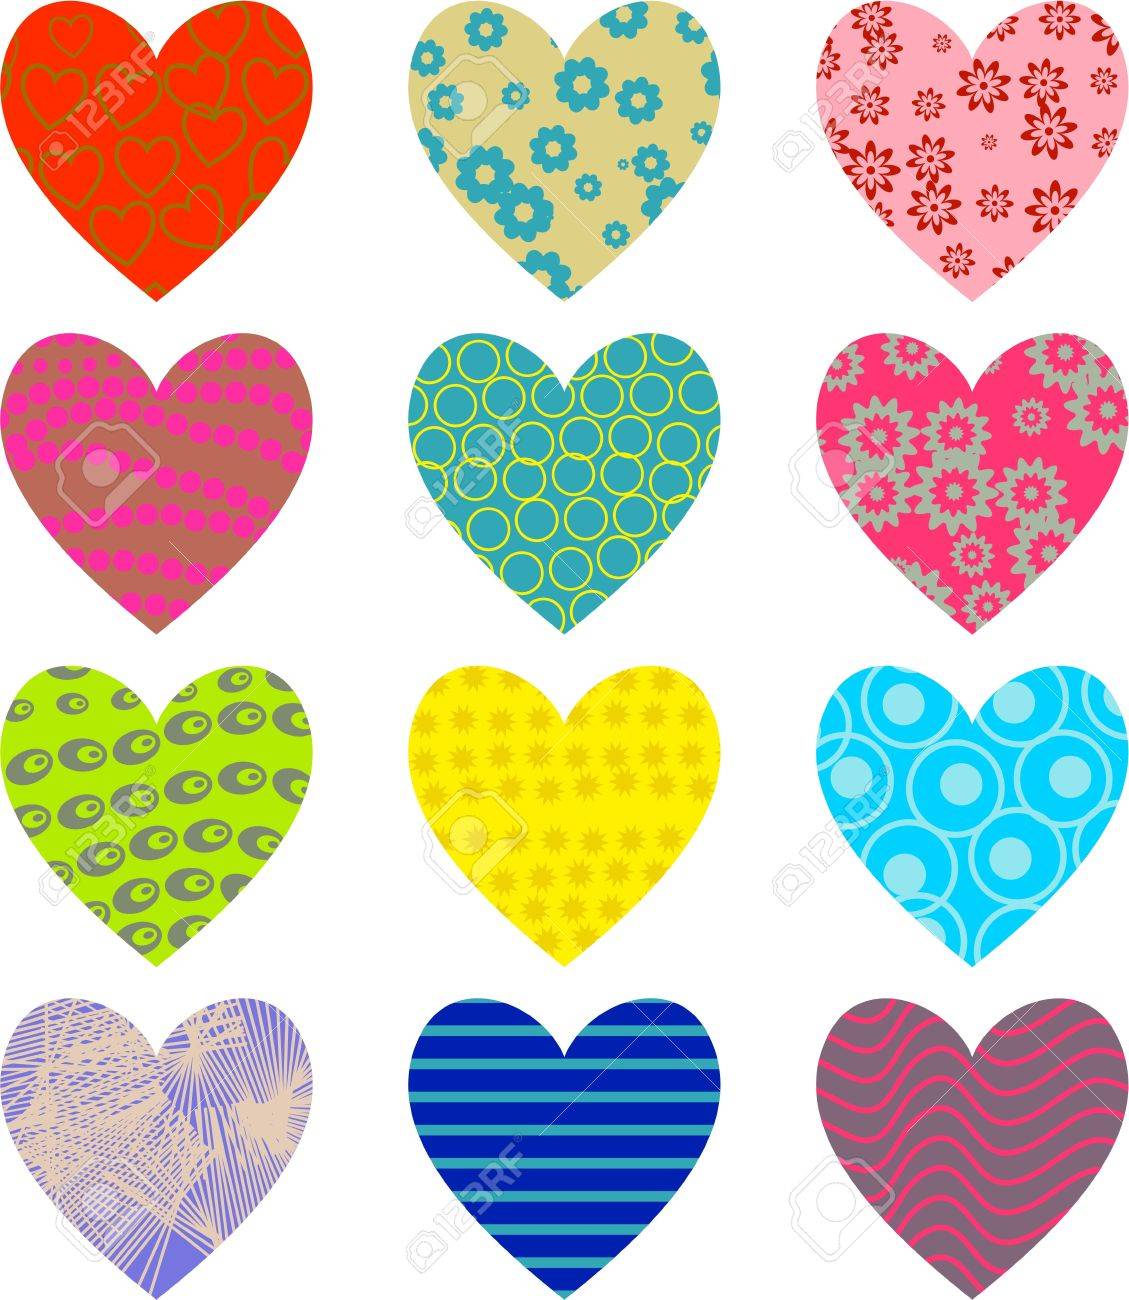 Artistic Abstract Patterned Heart Wallpaper Background Design